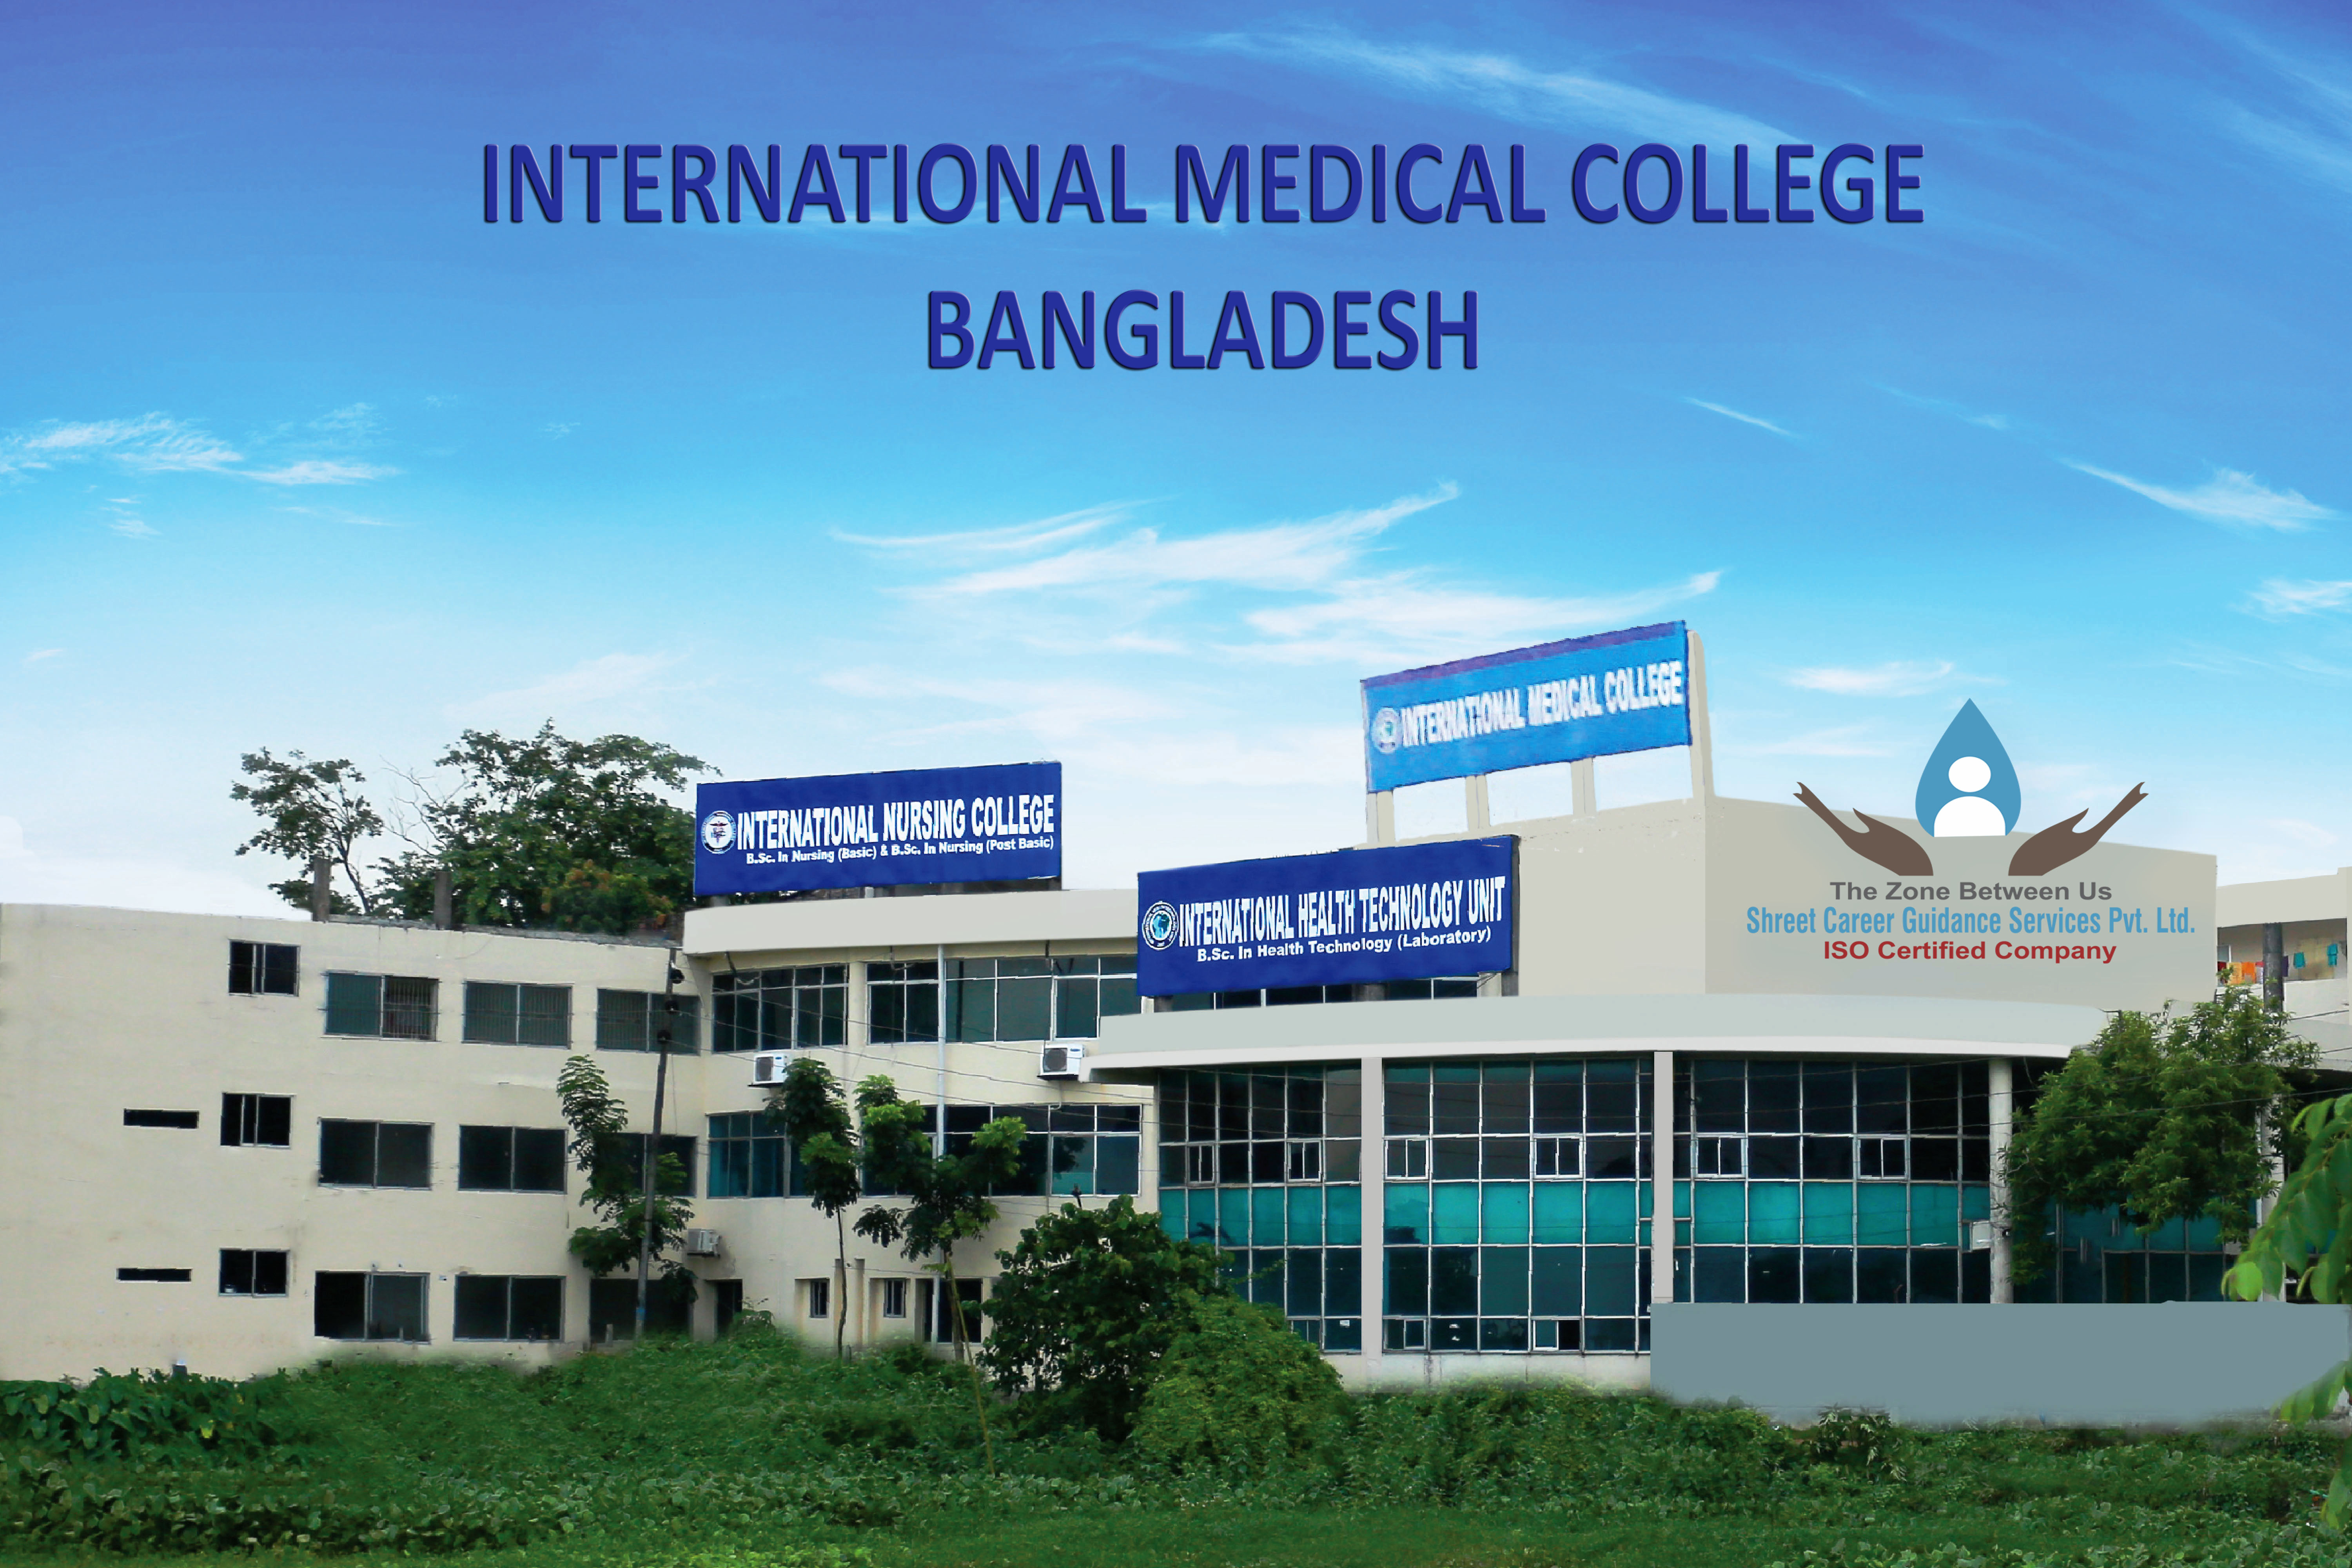 Courses Offered at International Medical College Bangladesh